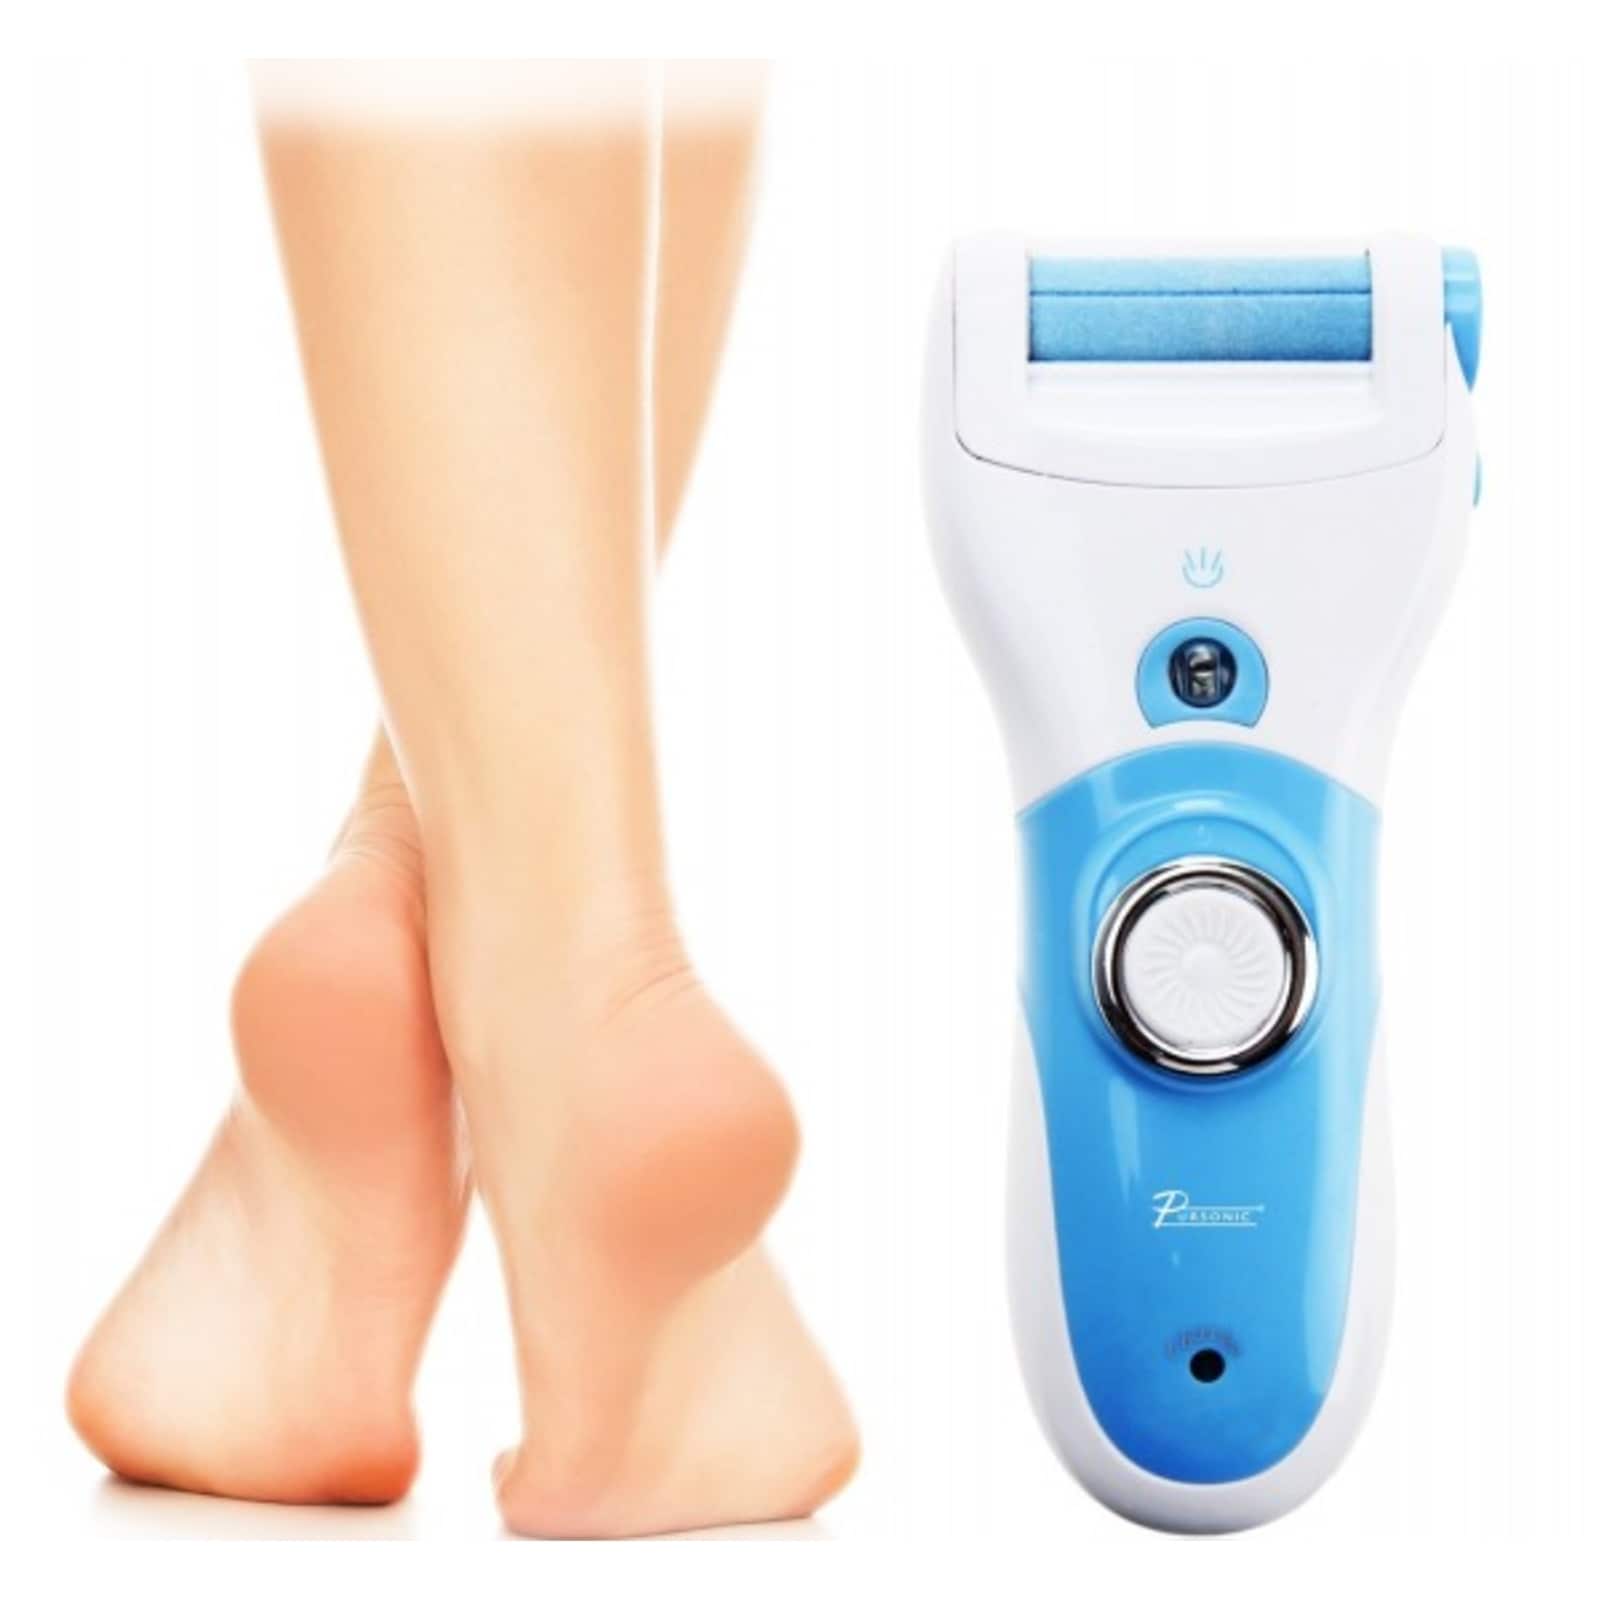 https://ak1.ostkcdn.com/images/products/is/images/direct/284d8dd43b08682ff878f5475ffb12eb3da3dcae/Pursonic-Rechargeable-Electric-Callus-Remover-and-Pedicure-Foot-File.jpg